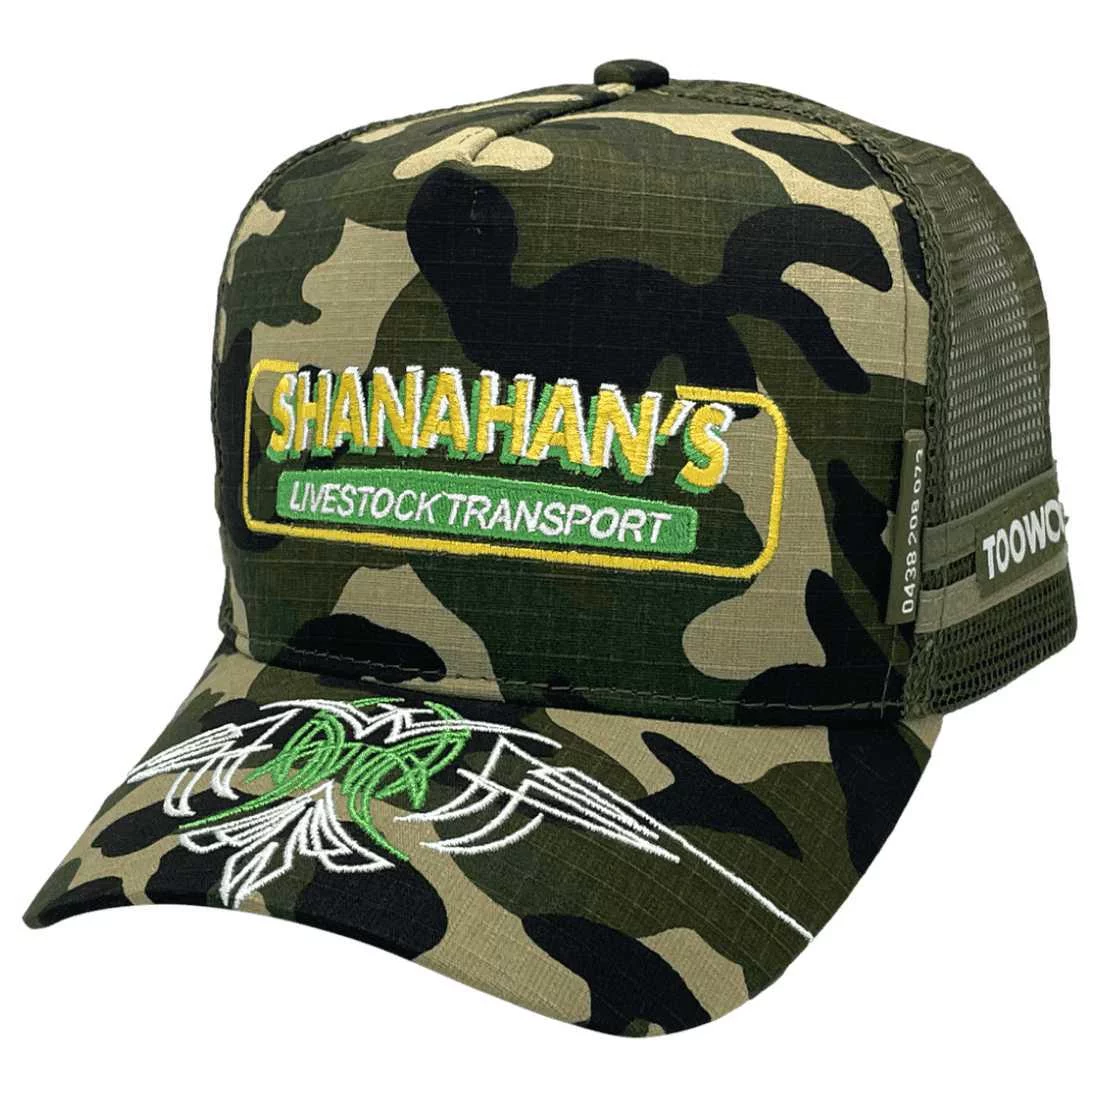 Shanahans Livestock Transport Wodonga VIC and Toowoomba QLD HP Power Aussie Trucker Hat with Australian Head Fit Crown Forest Green Ripstop Camo